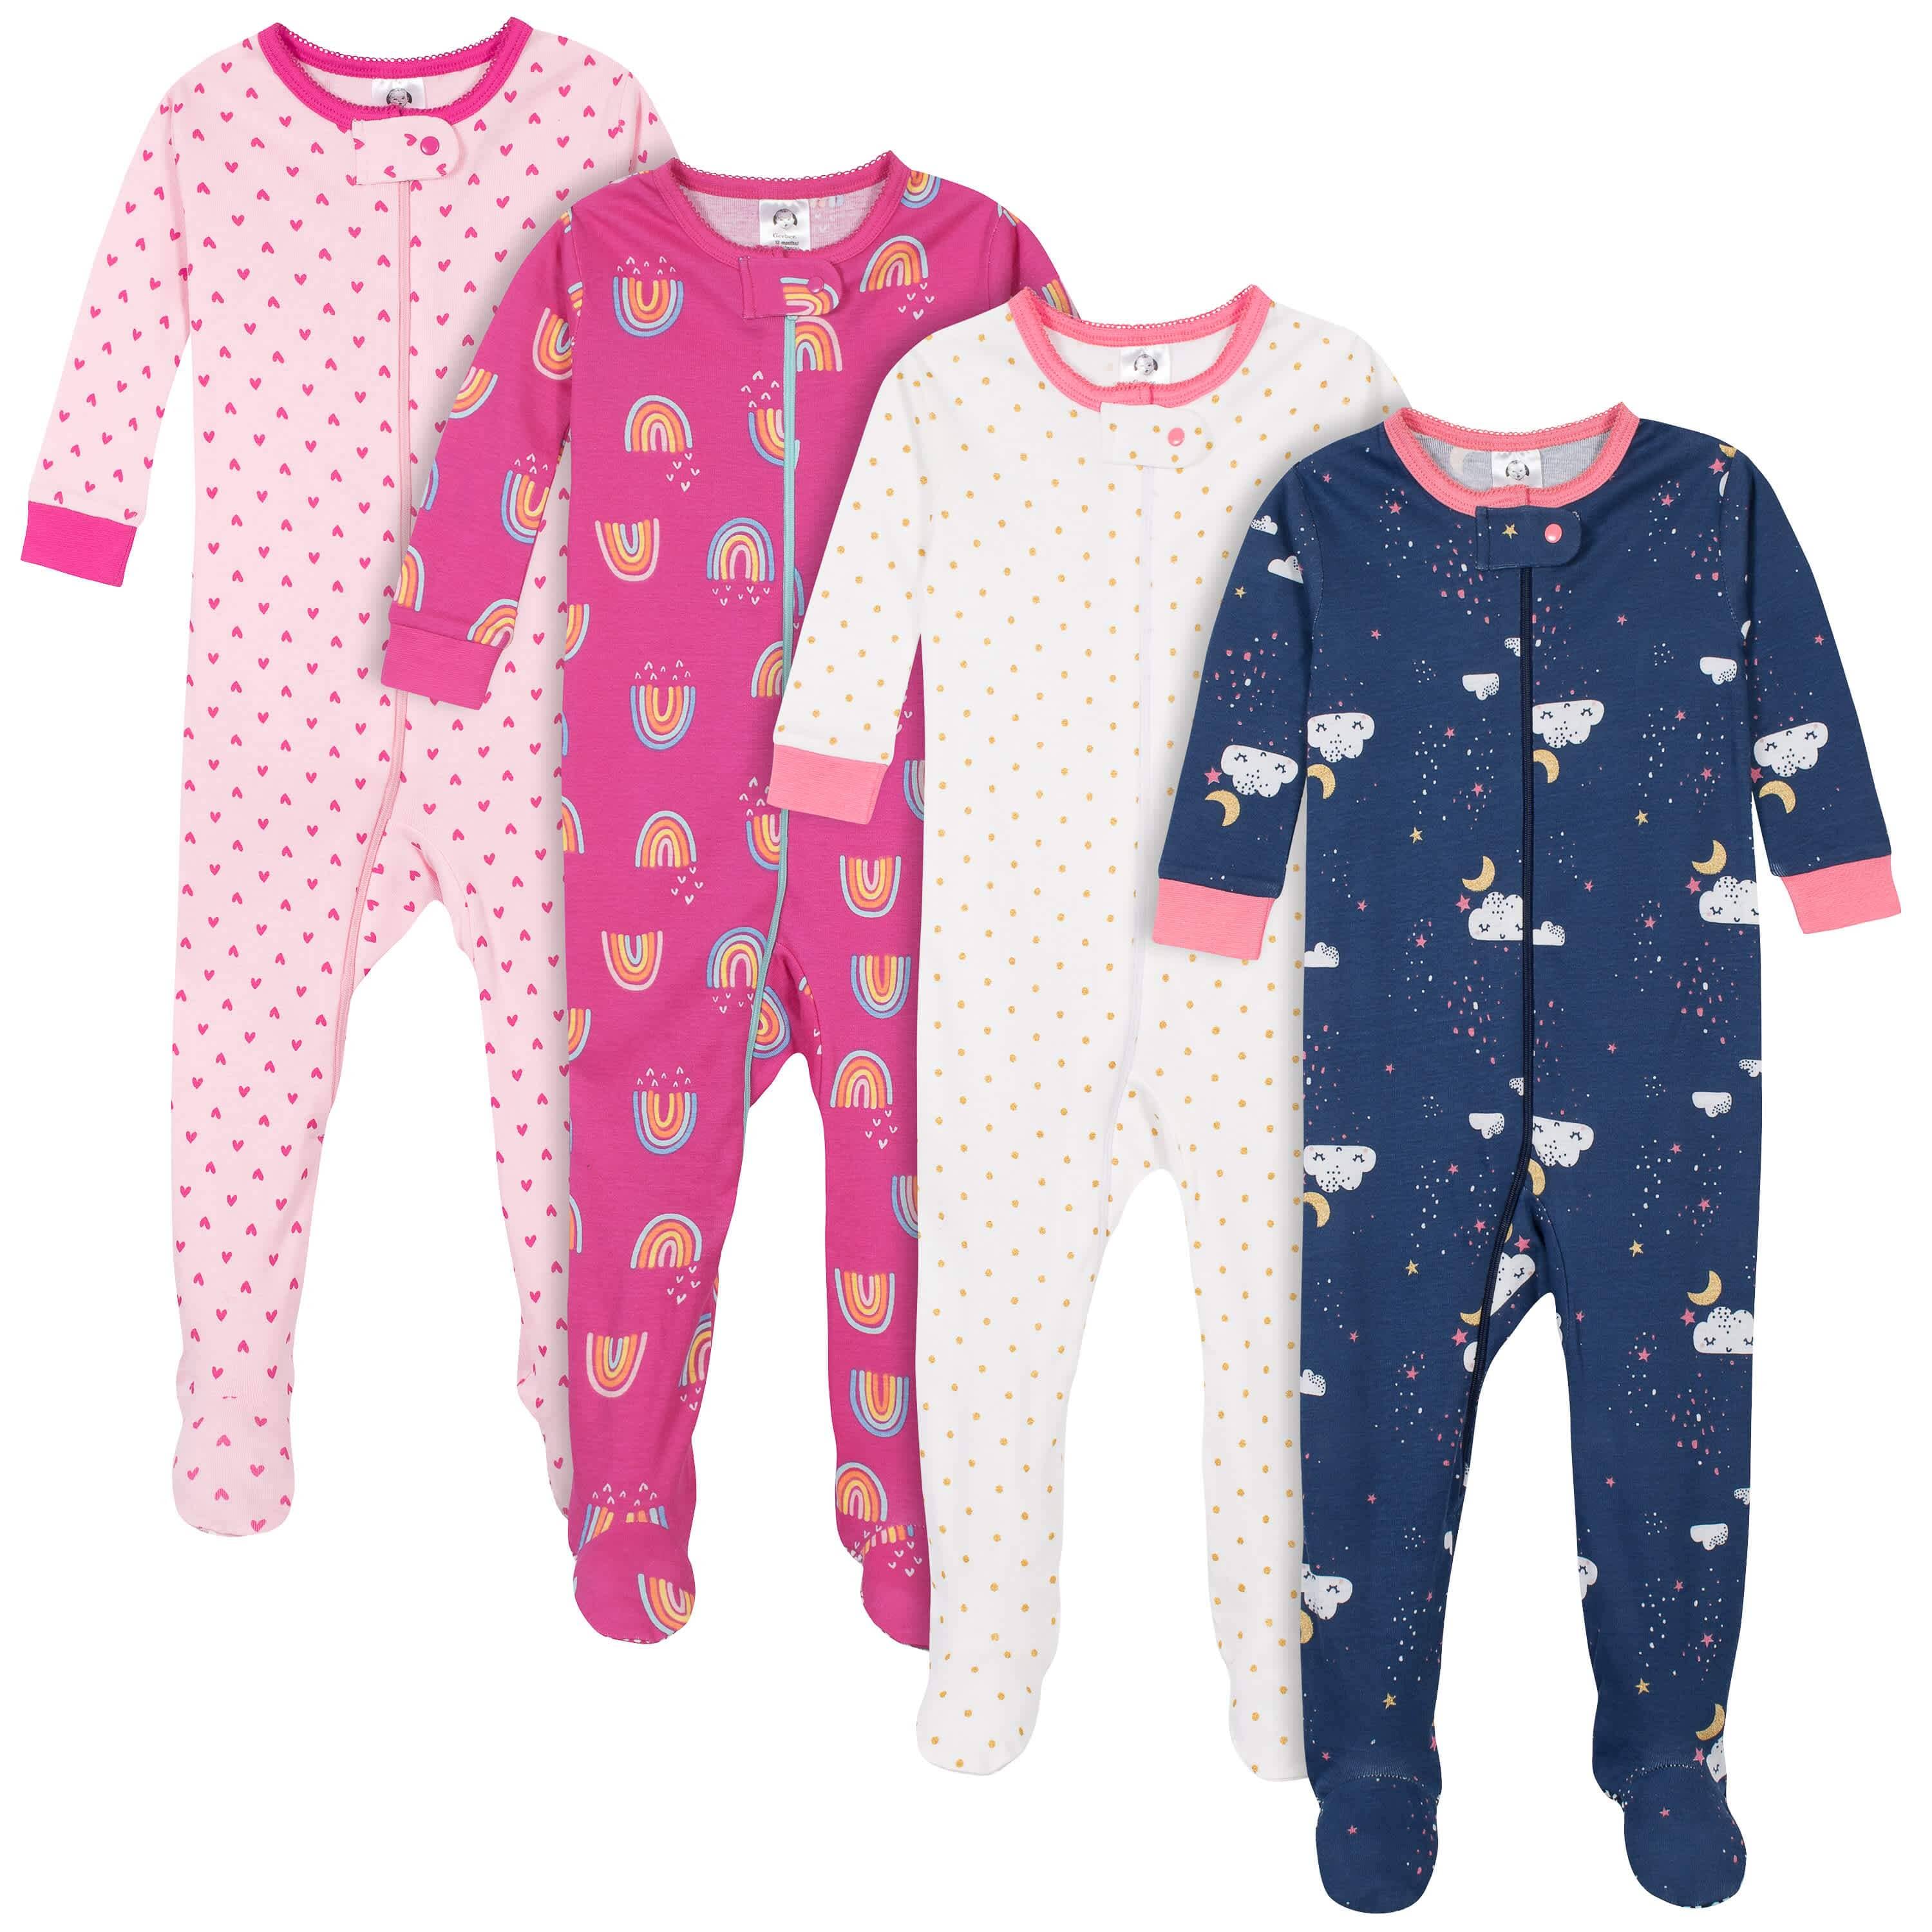  Elfeves Kids Girls' Soft Breathable Comfortable Cotton